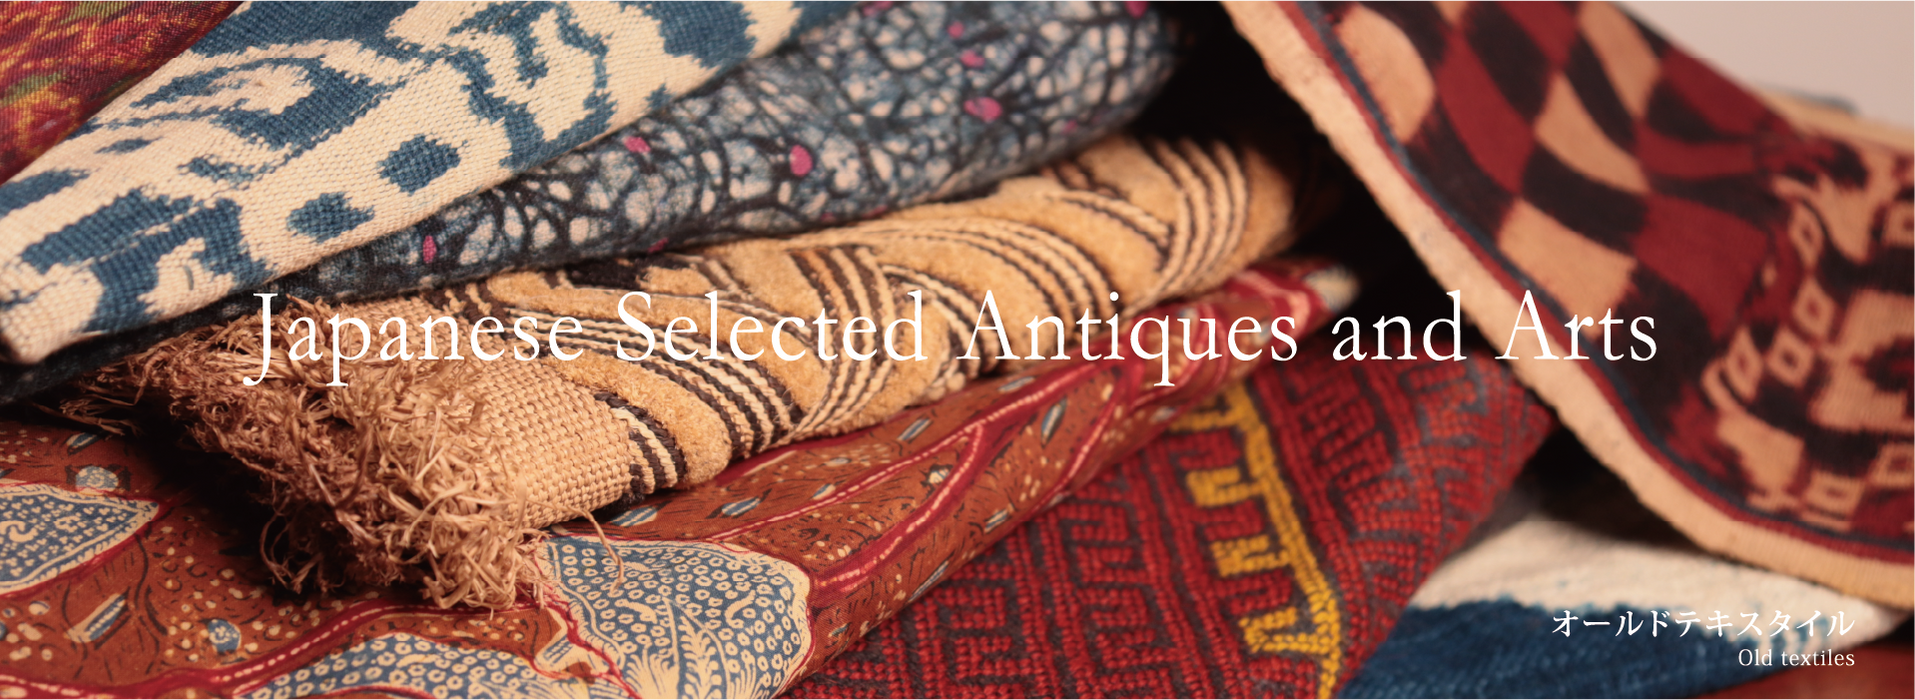 Japanese Selected Antiques and Arts オールドテキスタイル Old textiles